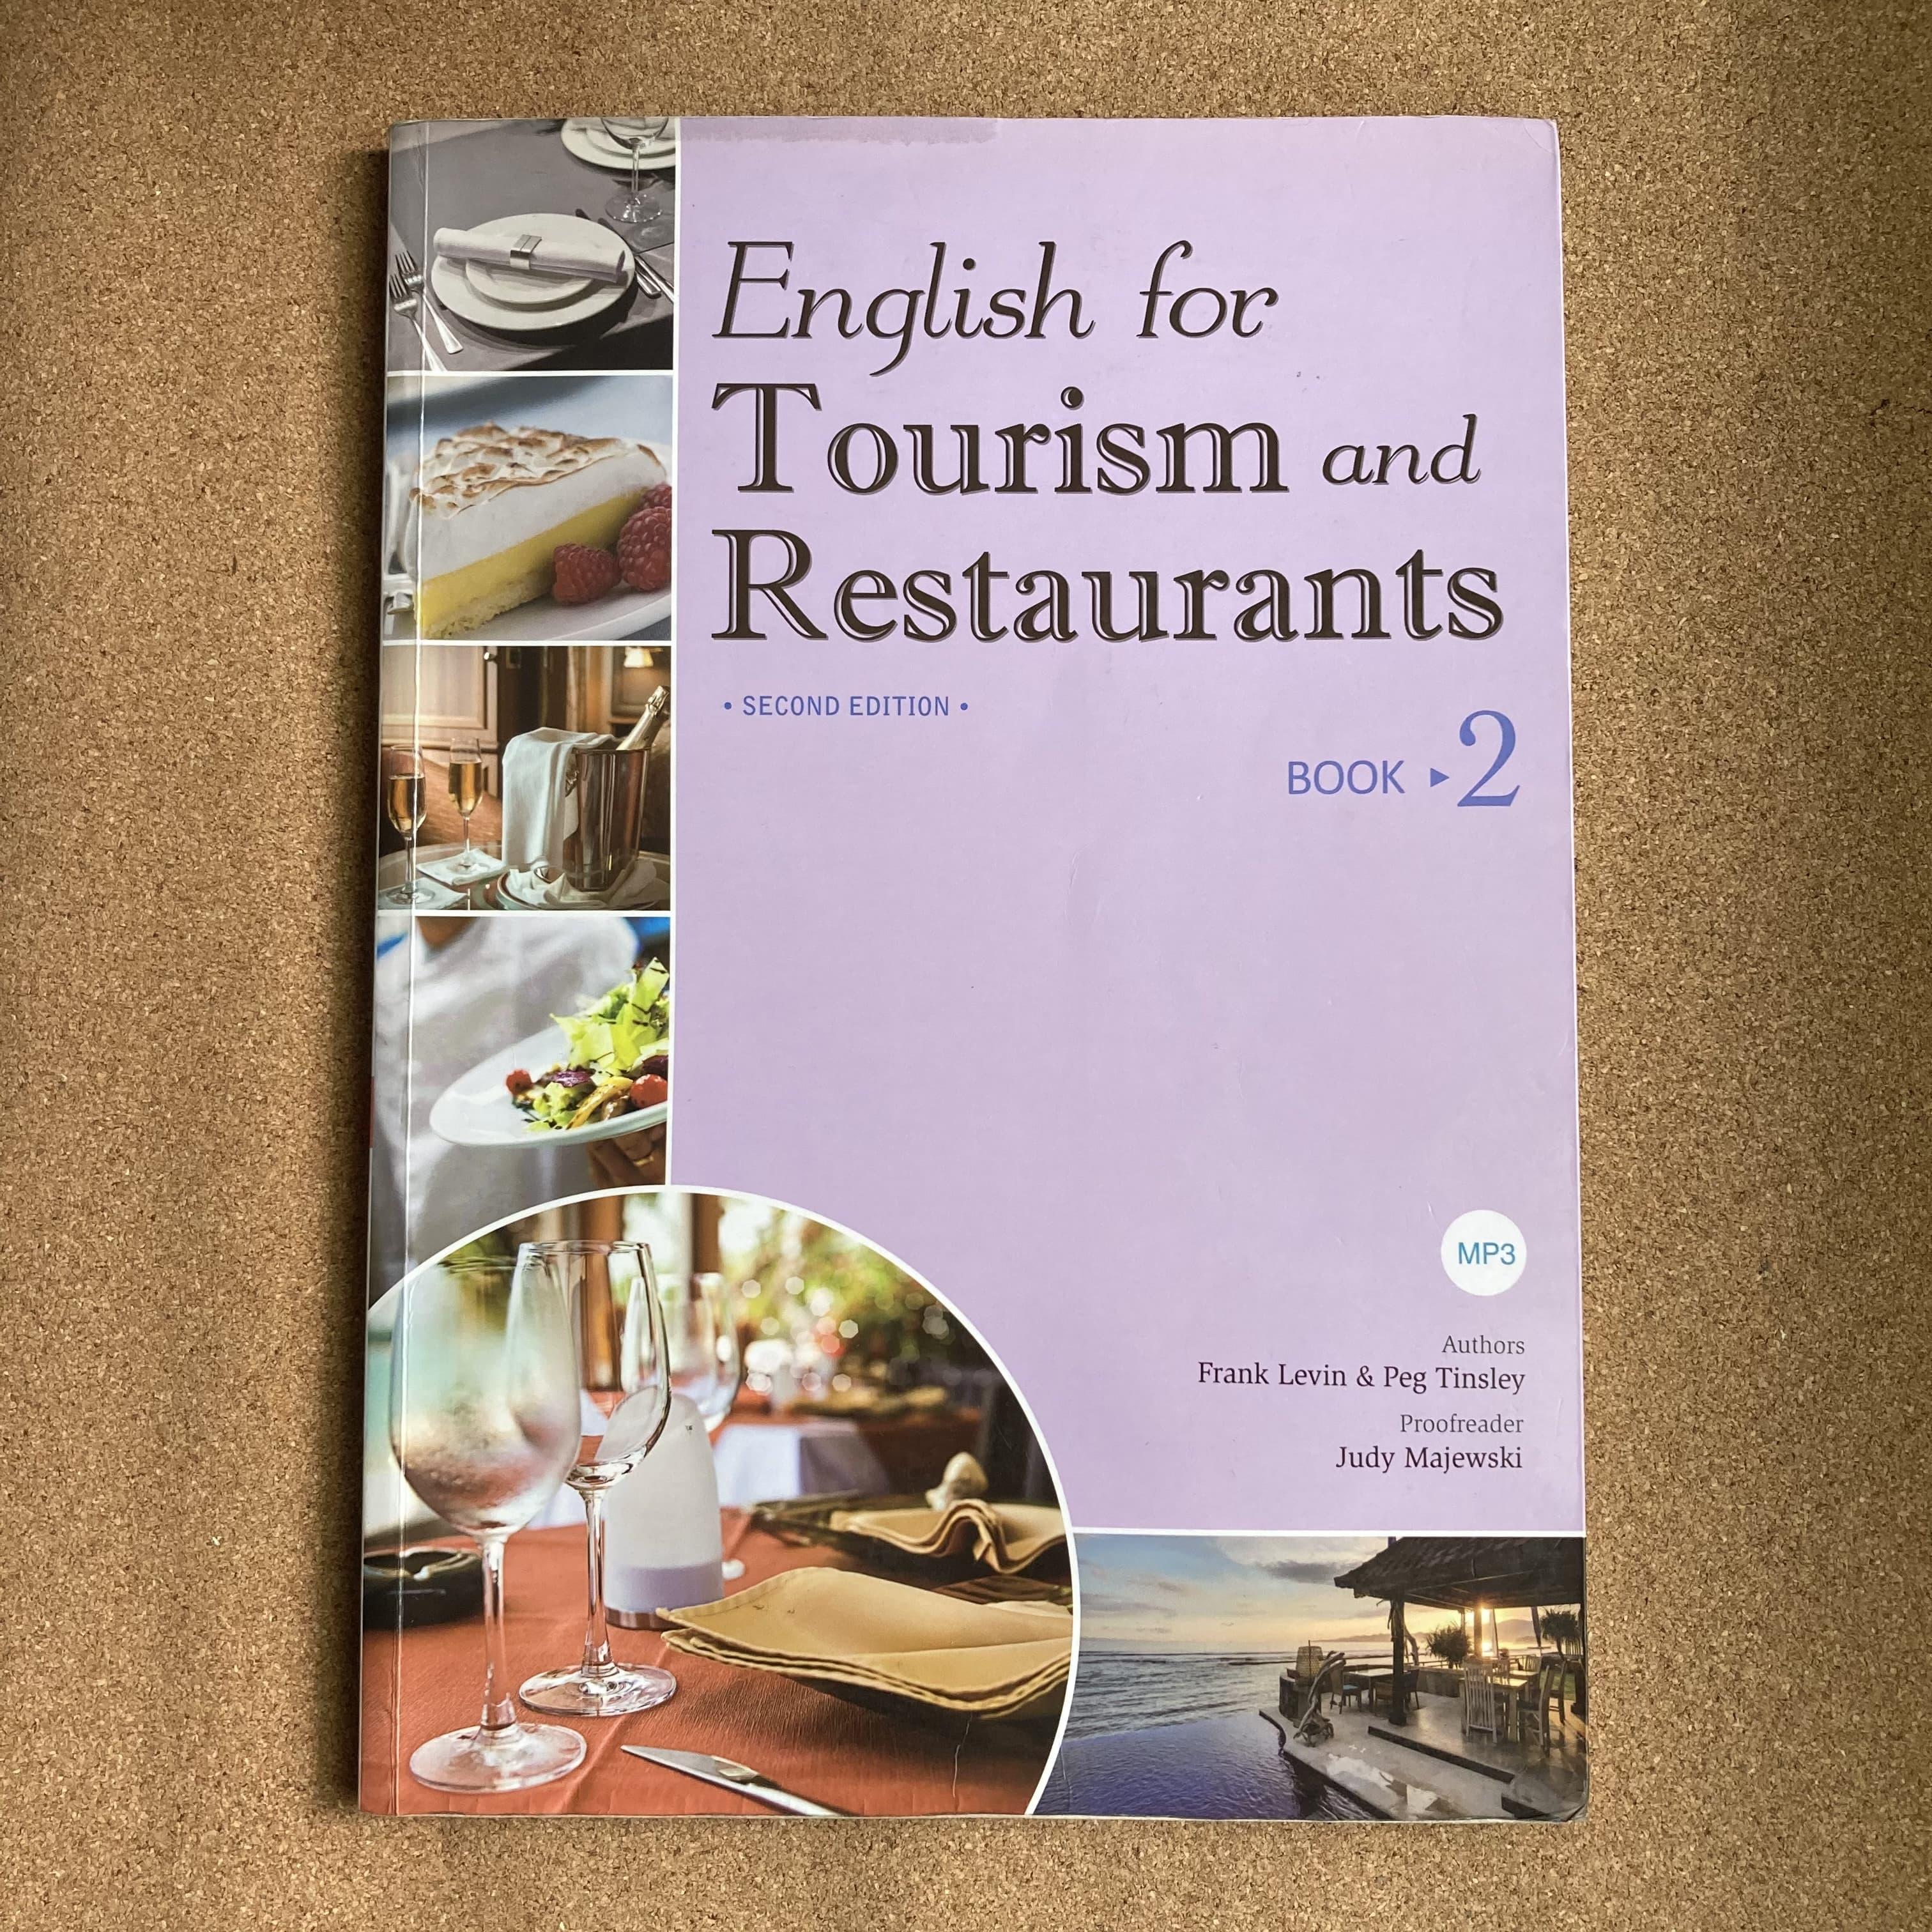 English for tourism and restaurants  詳細資料